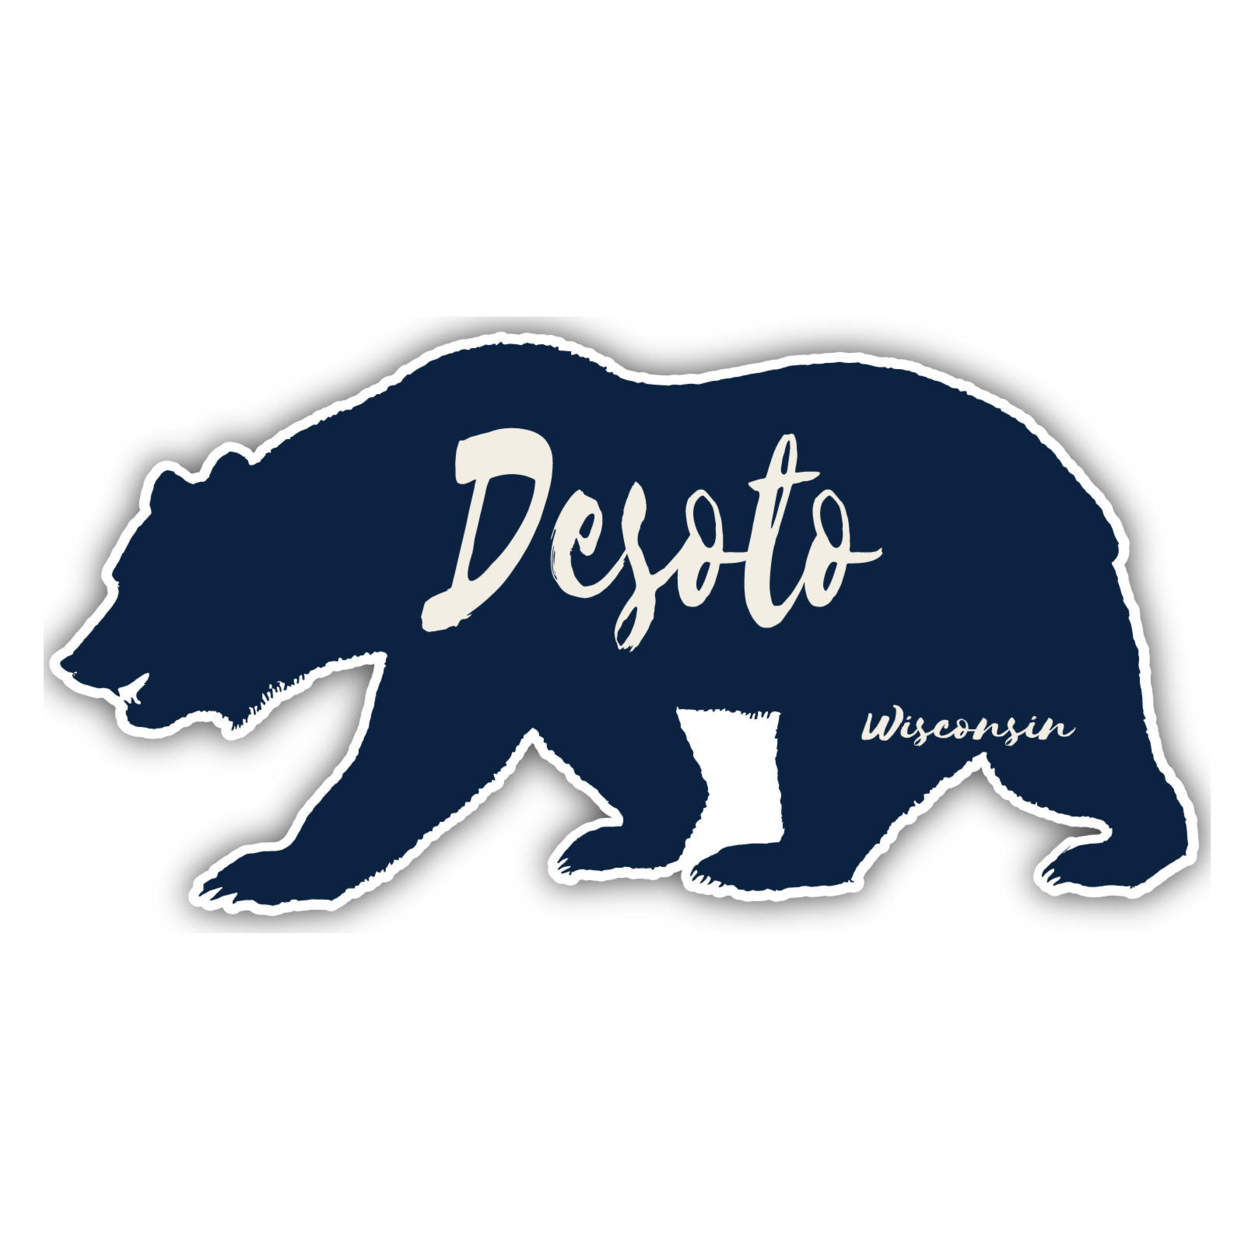 DeSoto Wisconsin Souvenir Decorative Stickers (Choose Theme And Size) - 4-Pack, 10-Inch, Bear